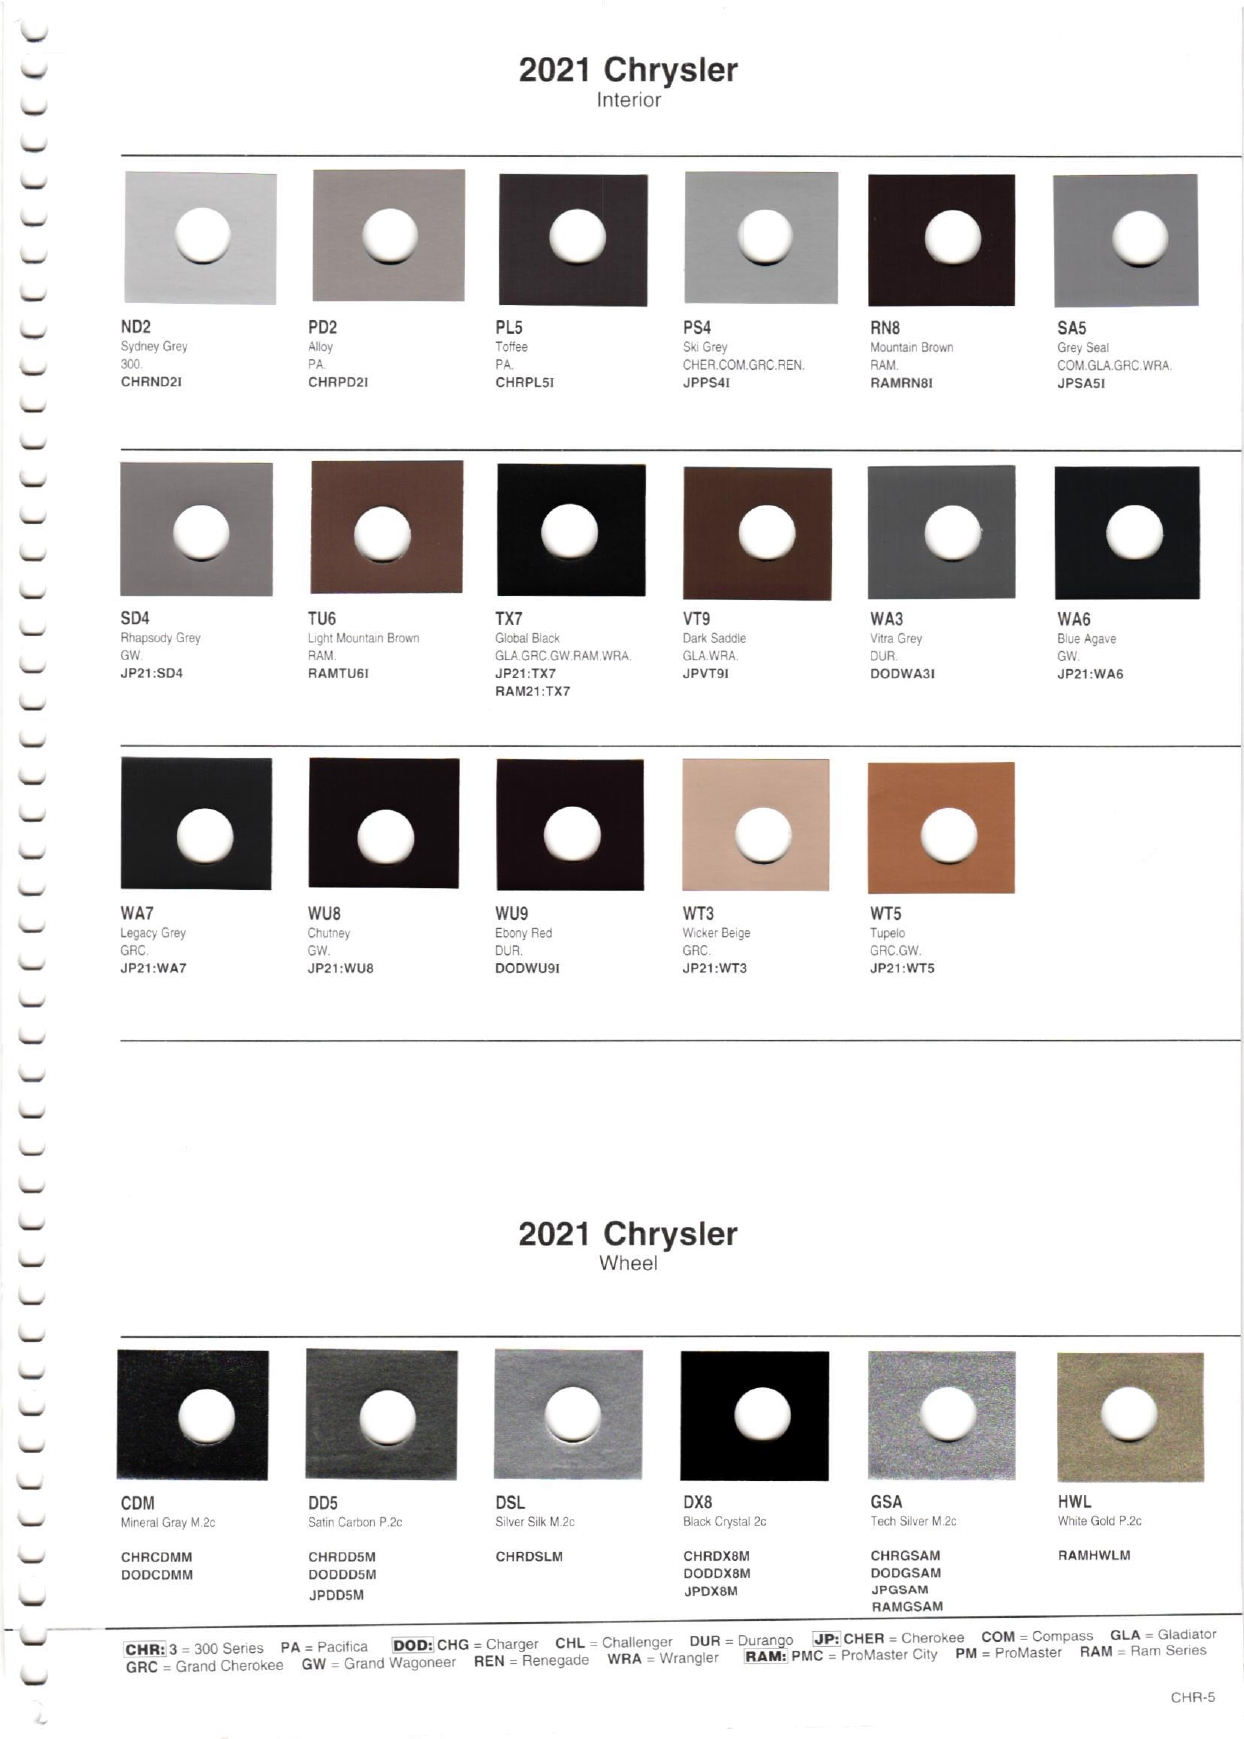 Color Codes and Paint Swatch Examples on 2021 Chrysler, Dodge, and Jeep Vehicles